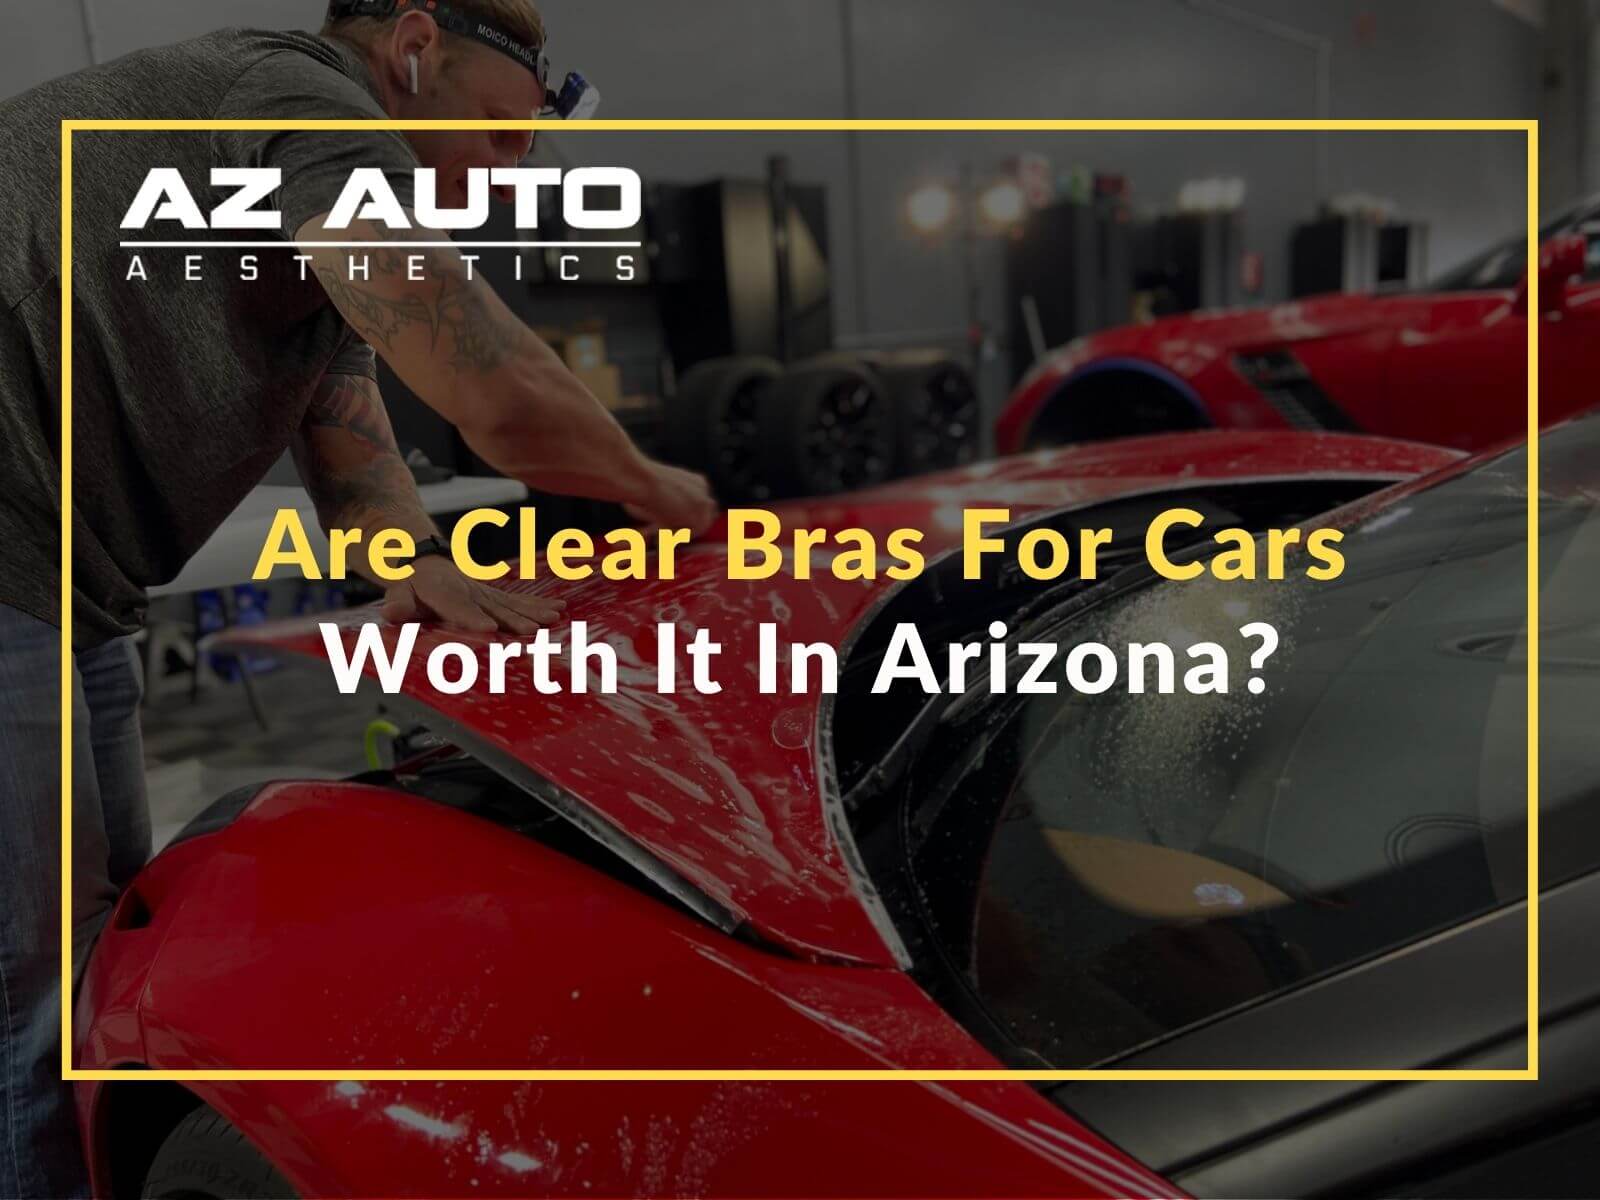 https://wedetailaz.com/wp-content/uploads/2021/08/are-clear-bras-for-cars-worth-it-in-arizona-featured.jpg